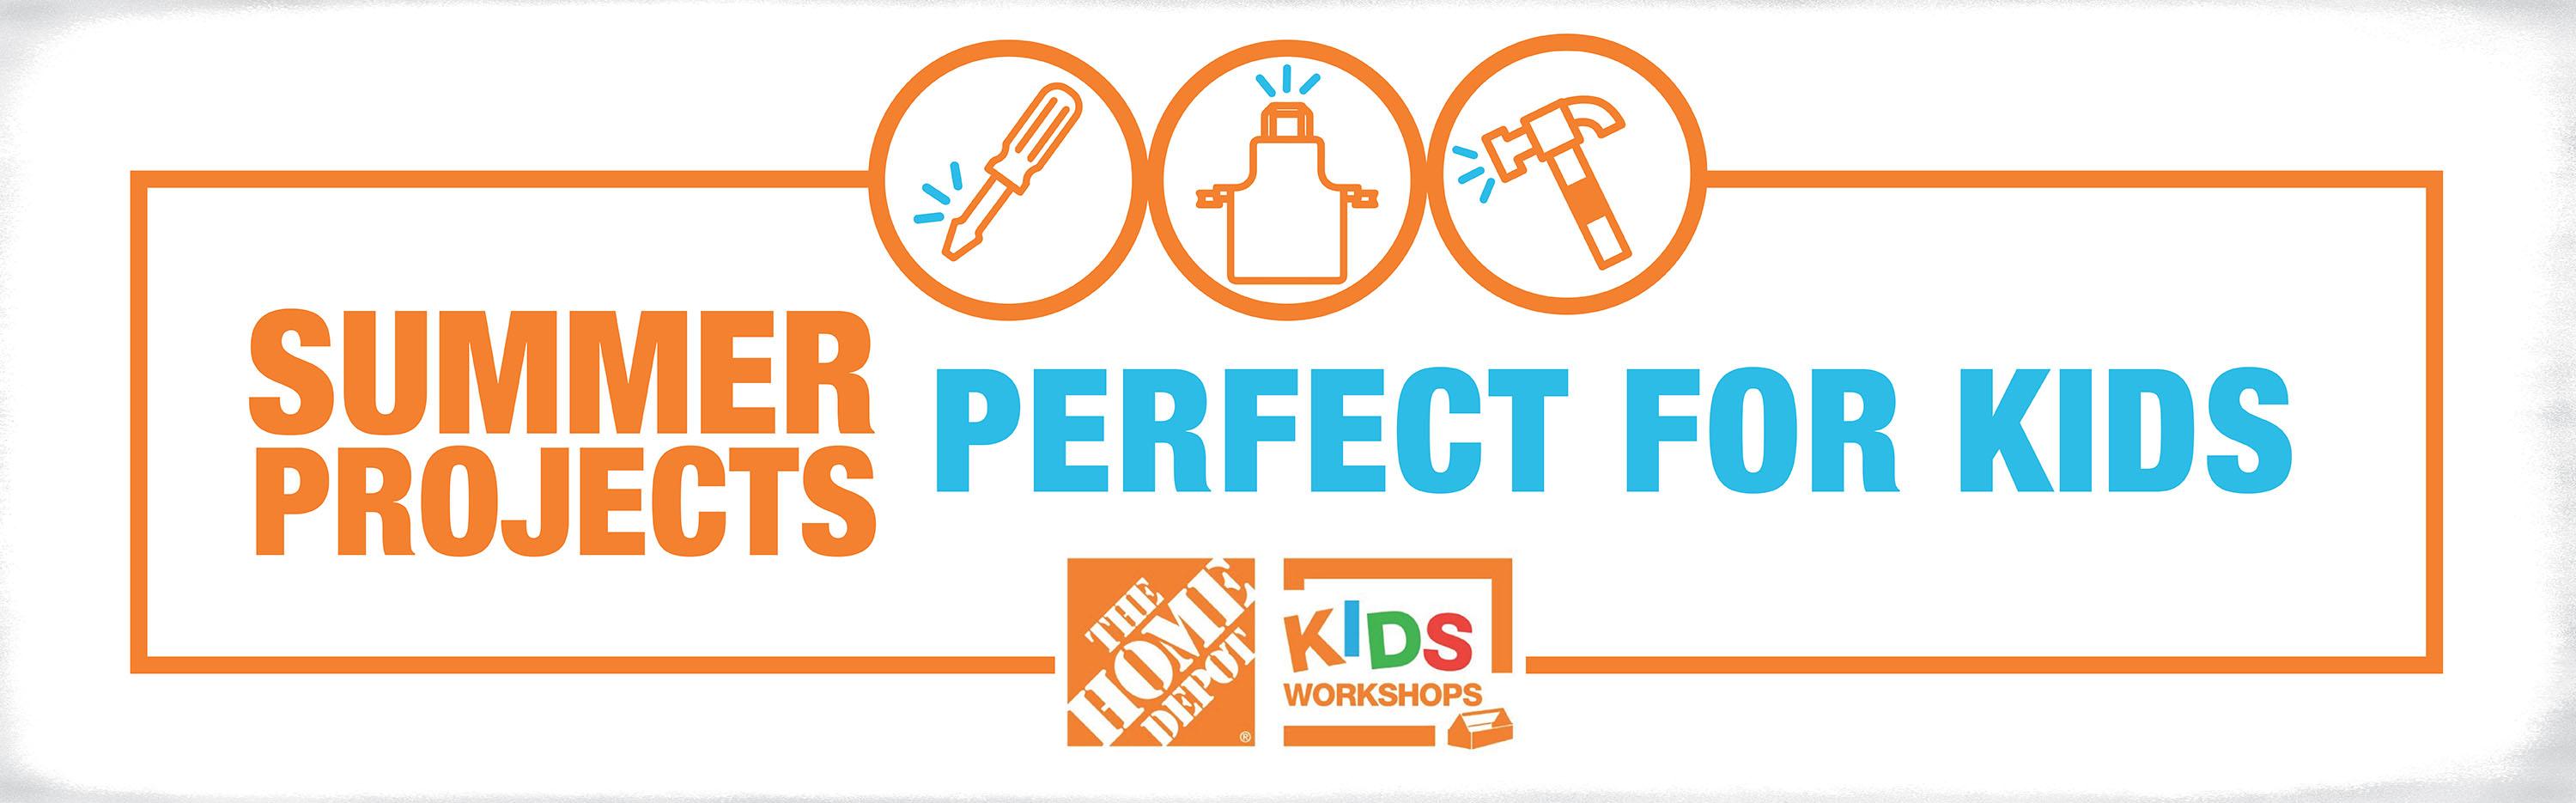 Summer Projects perfect for kids